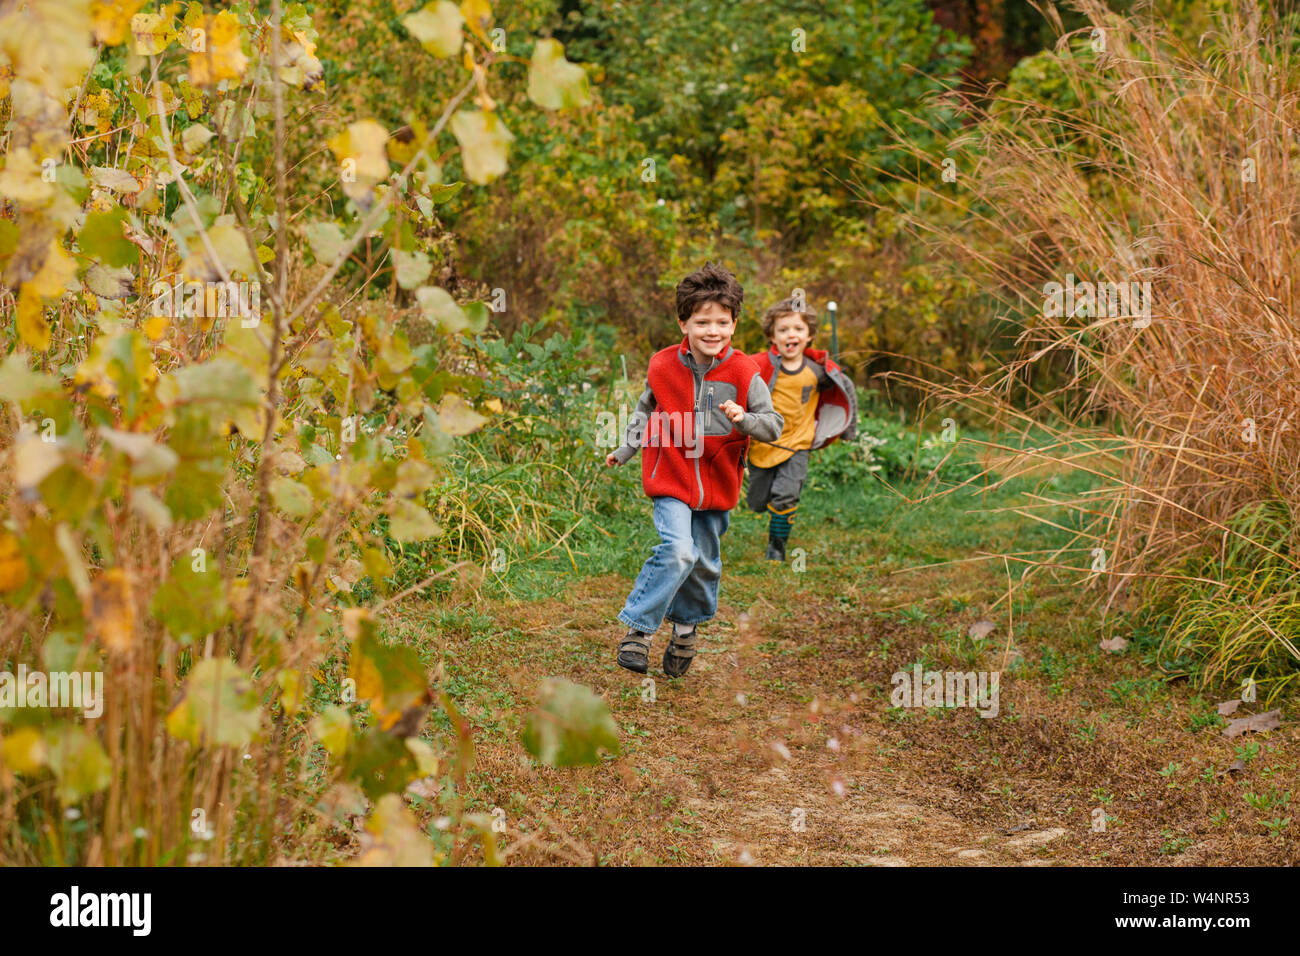 two happy children chase each other through a golden prairie Stock Photo